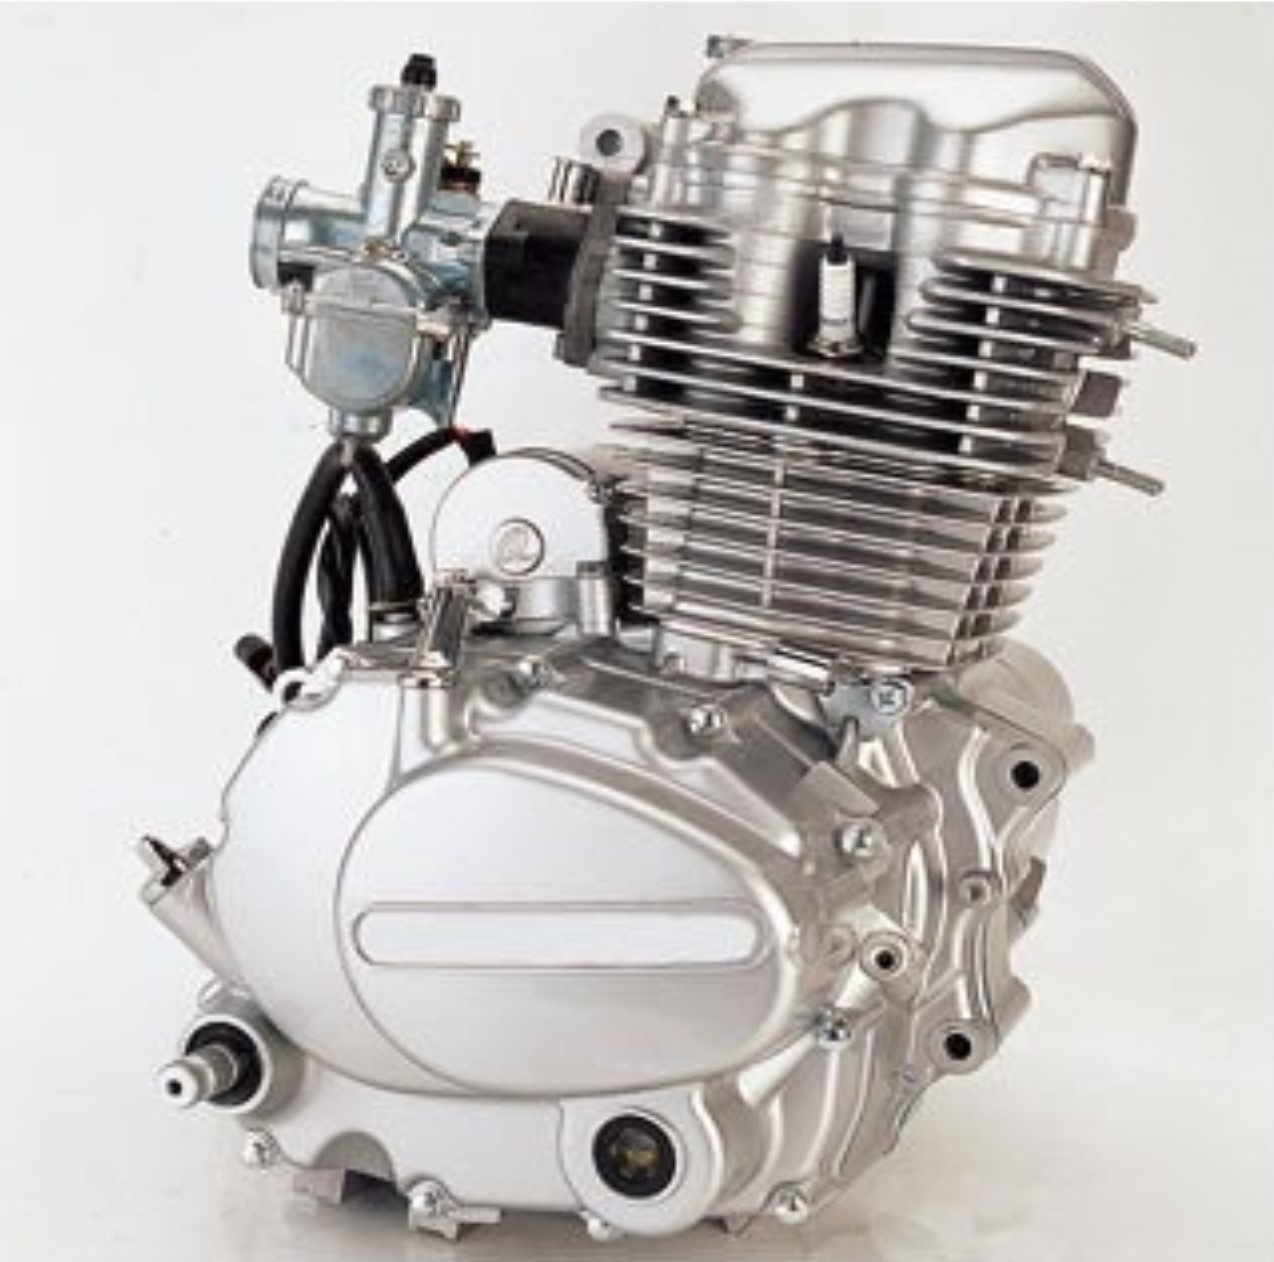 Engine Parts For 250cc CG Air Cooled